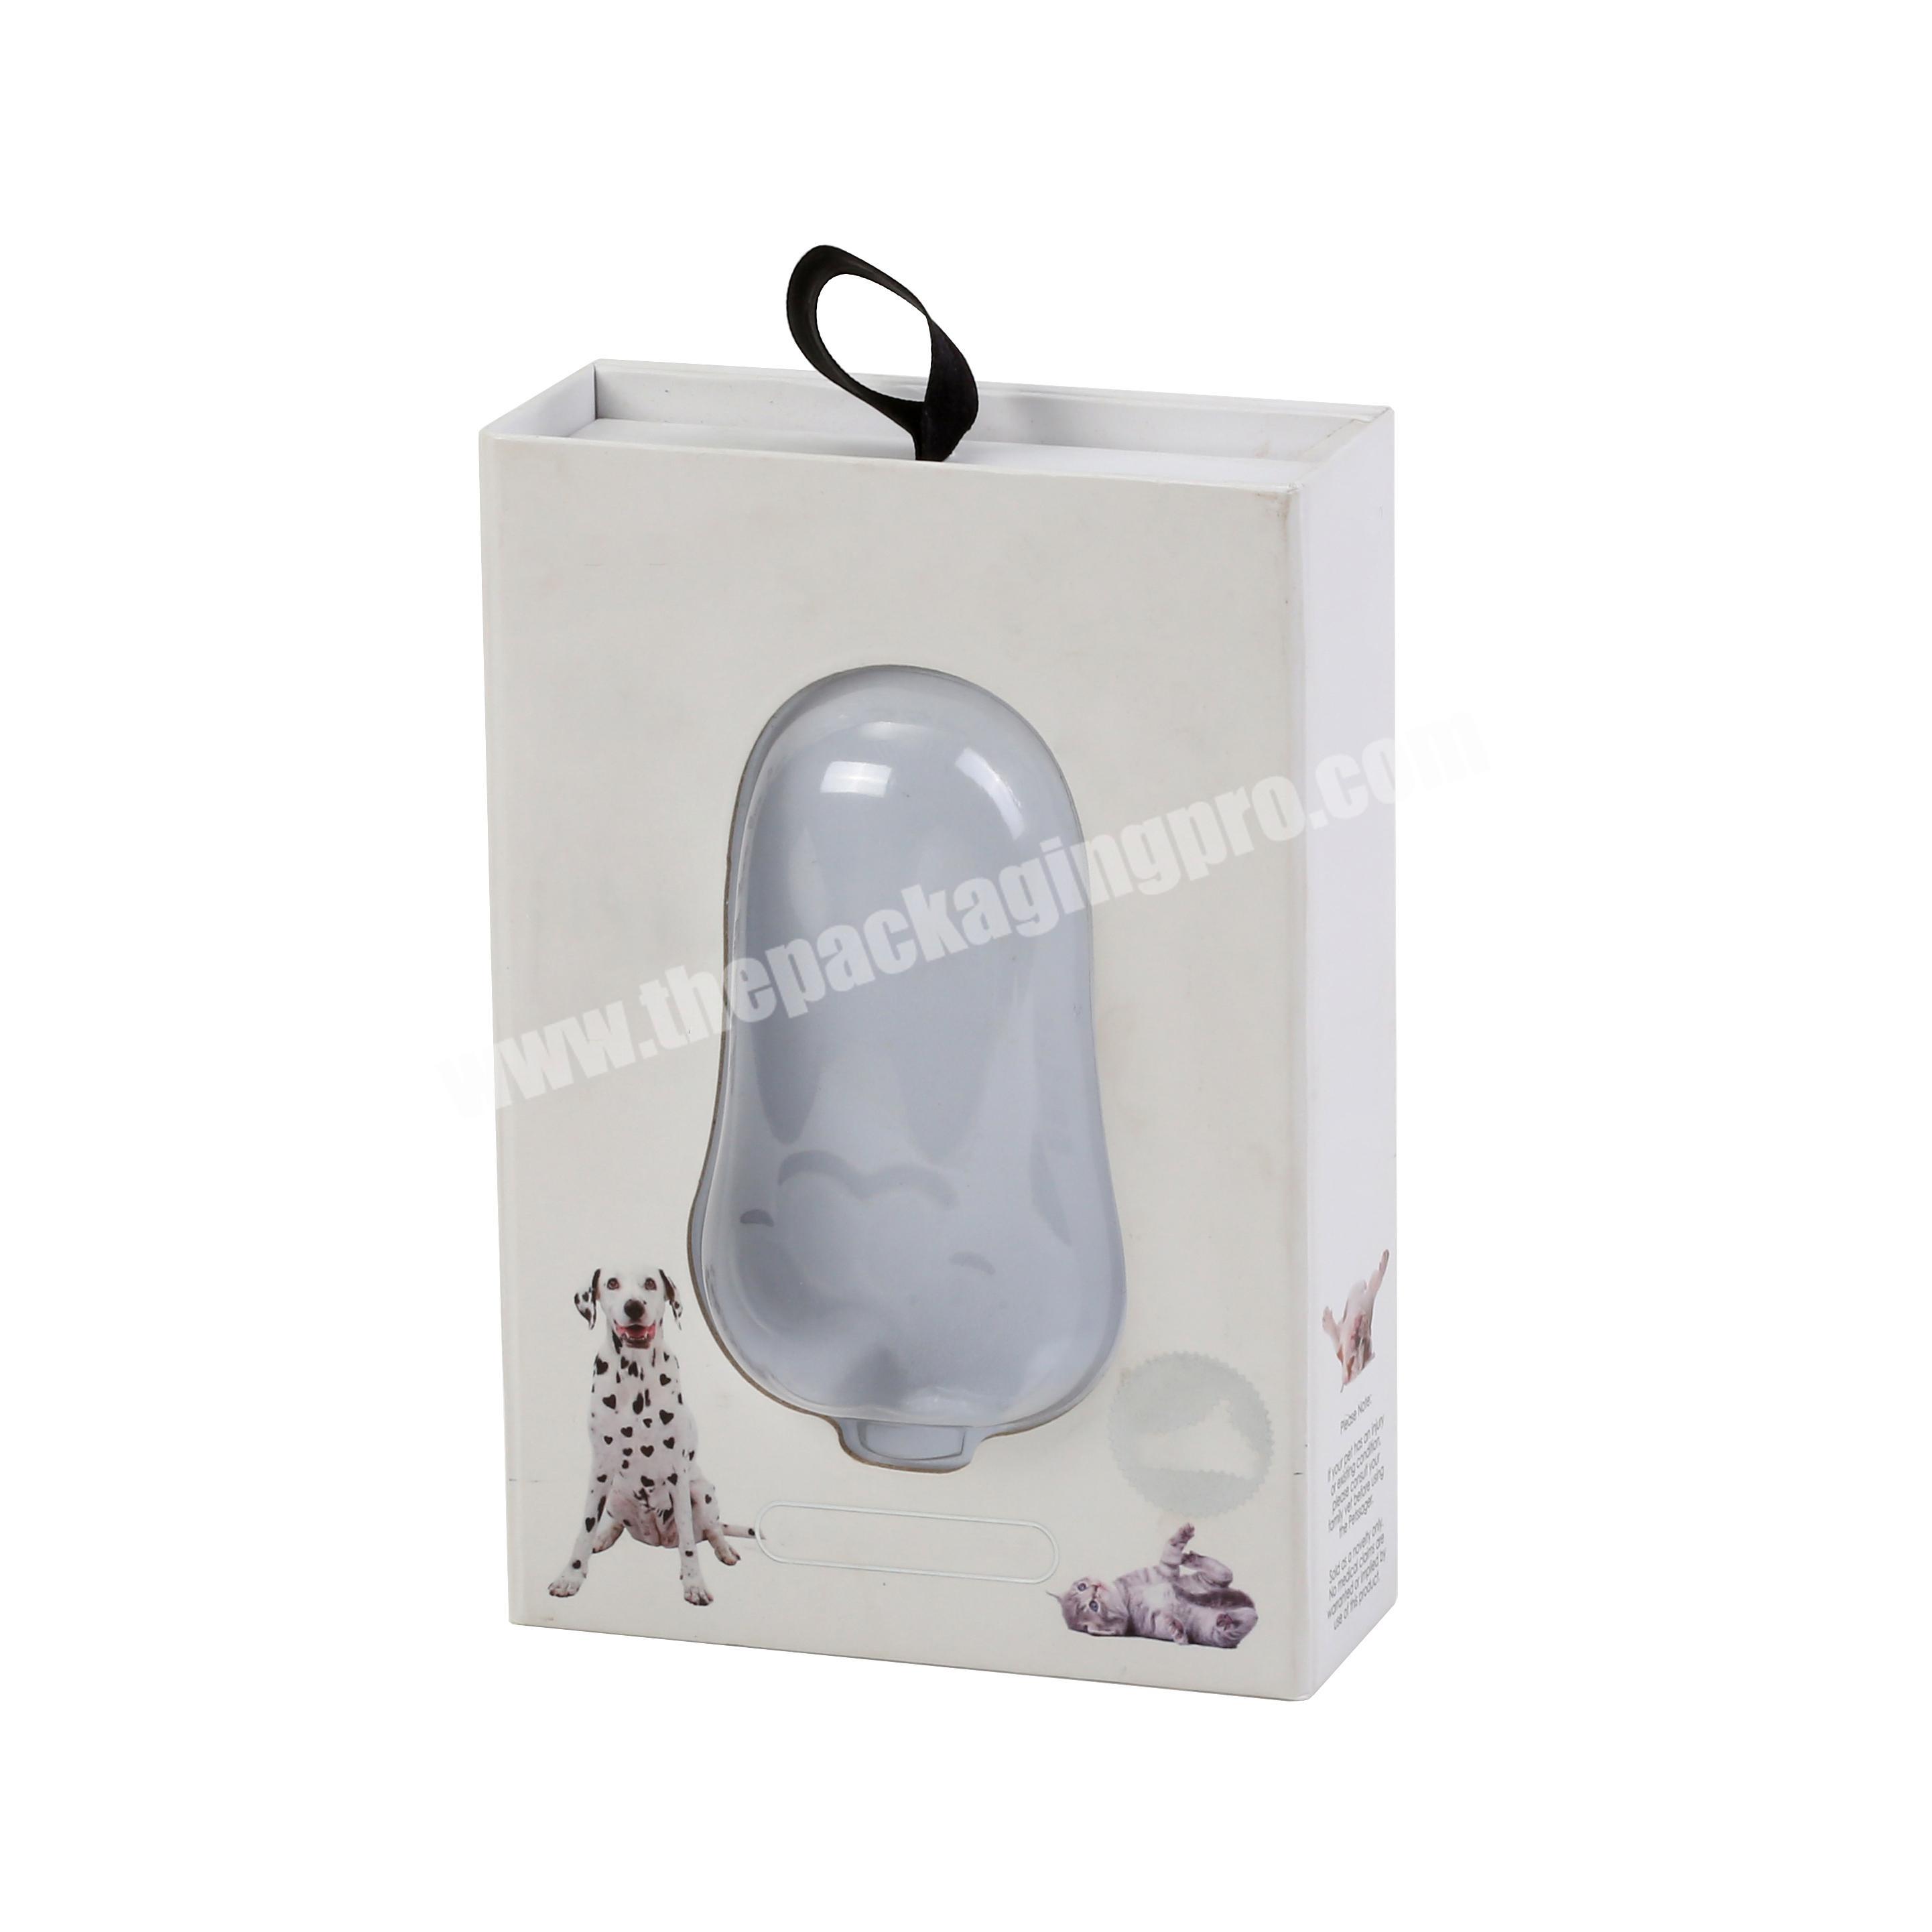 Set Up Paper Packaging Box book style box with window and vac tray inside